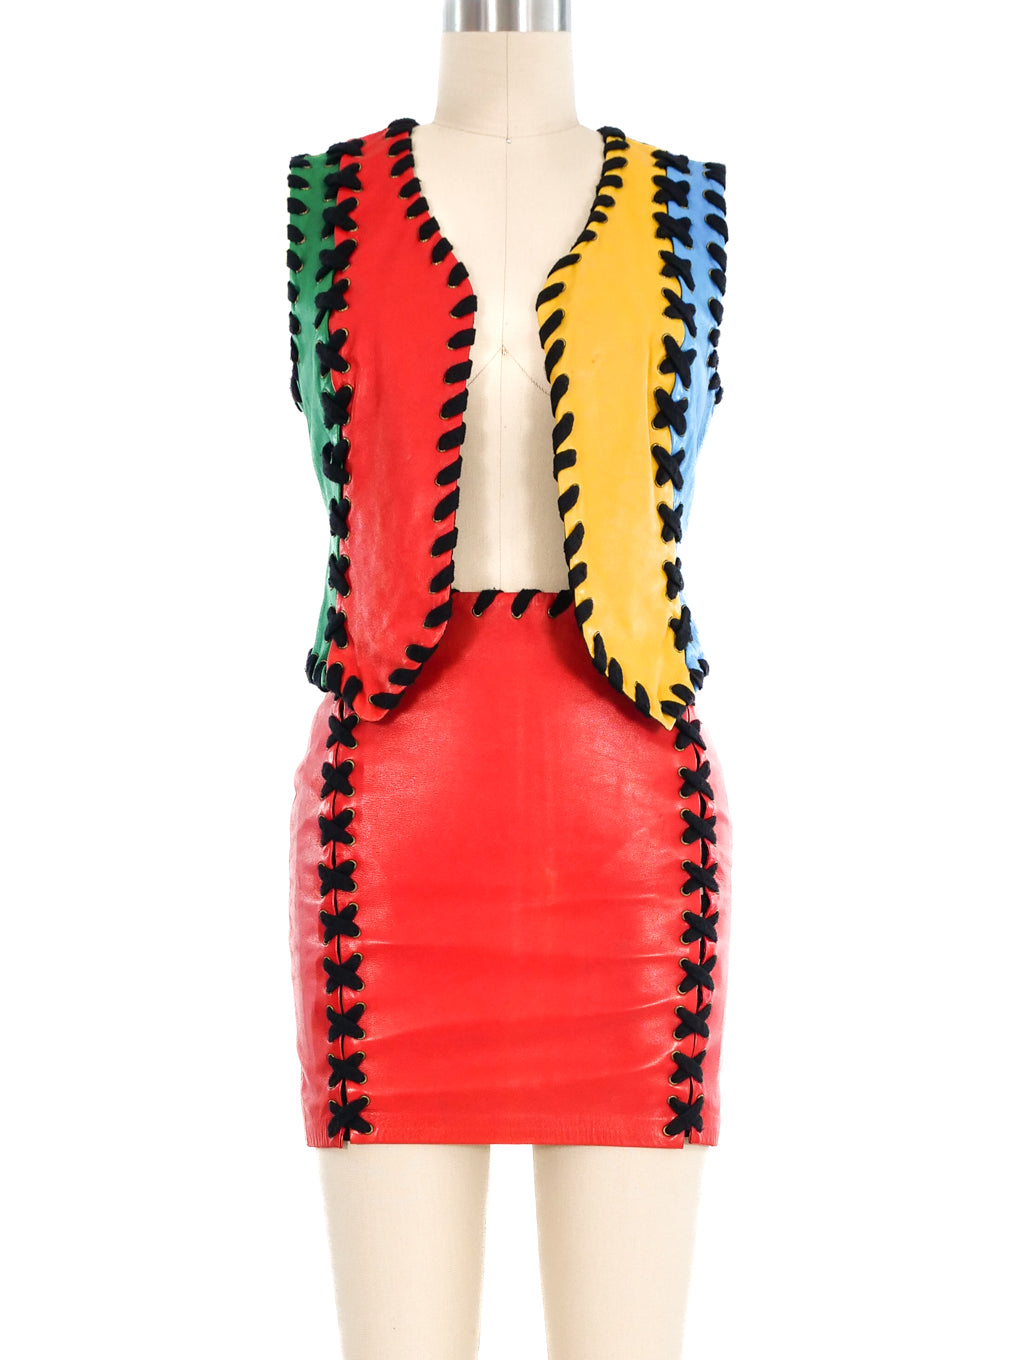 Moschino Colorblock Leather Ensemble